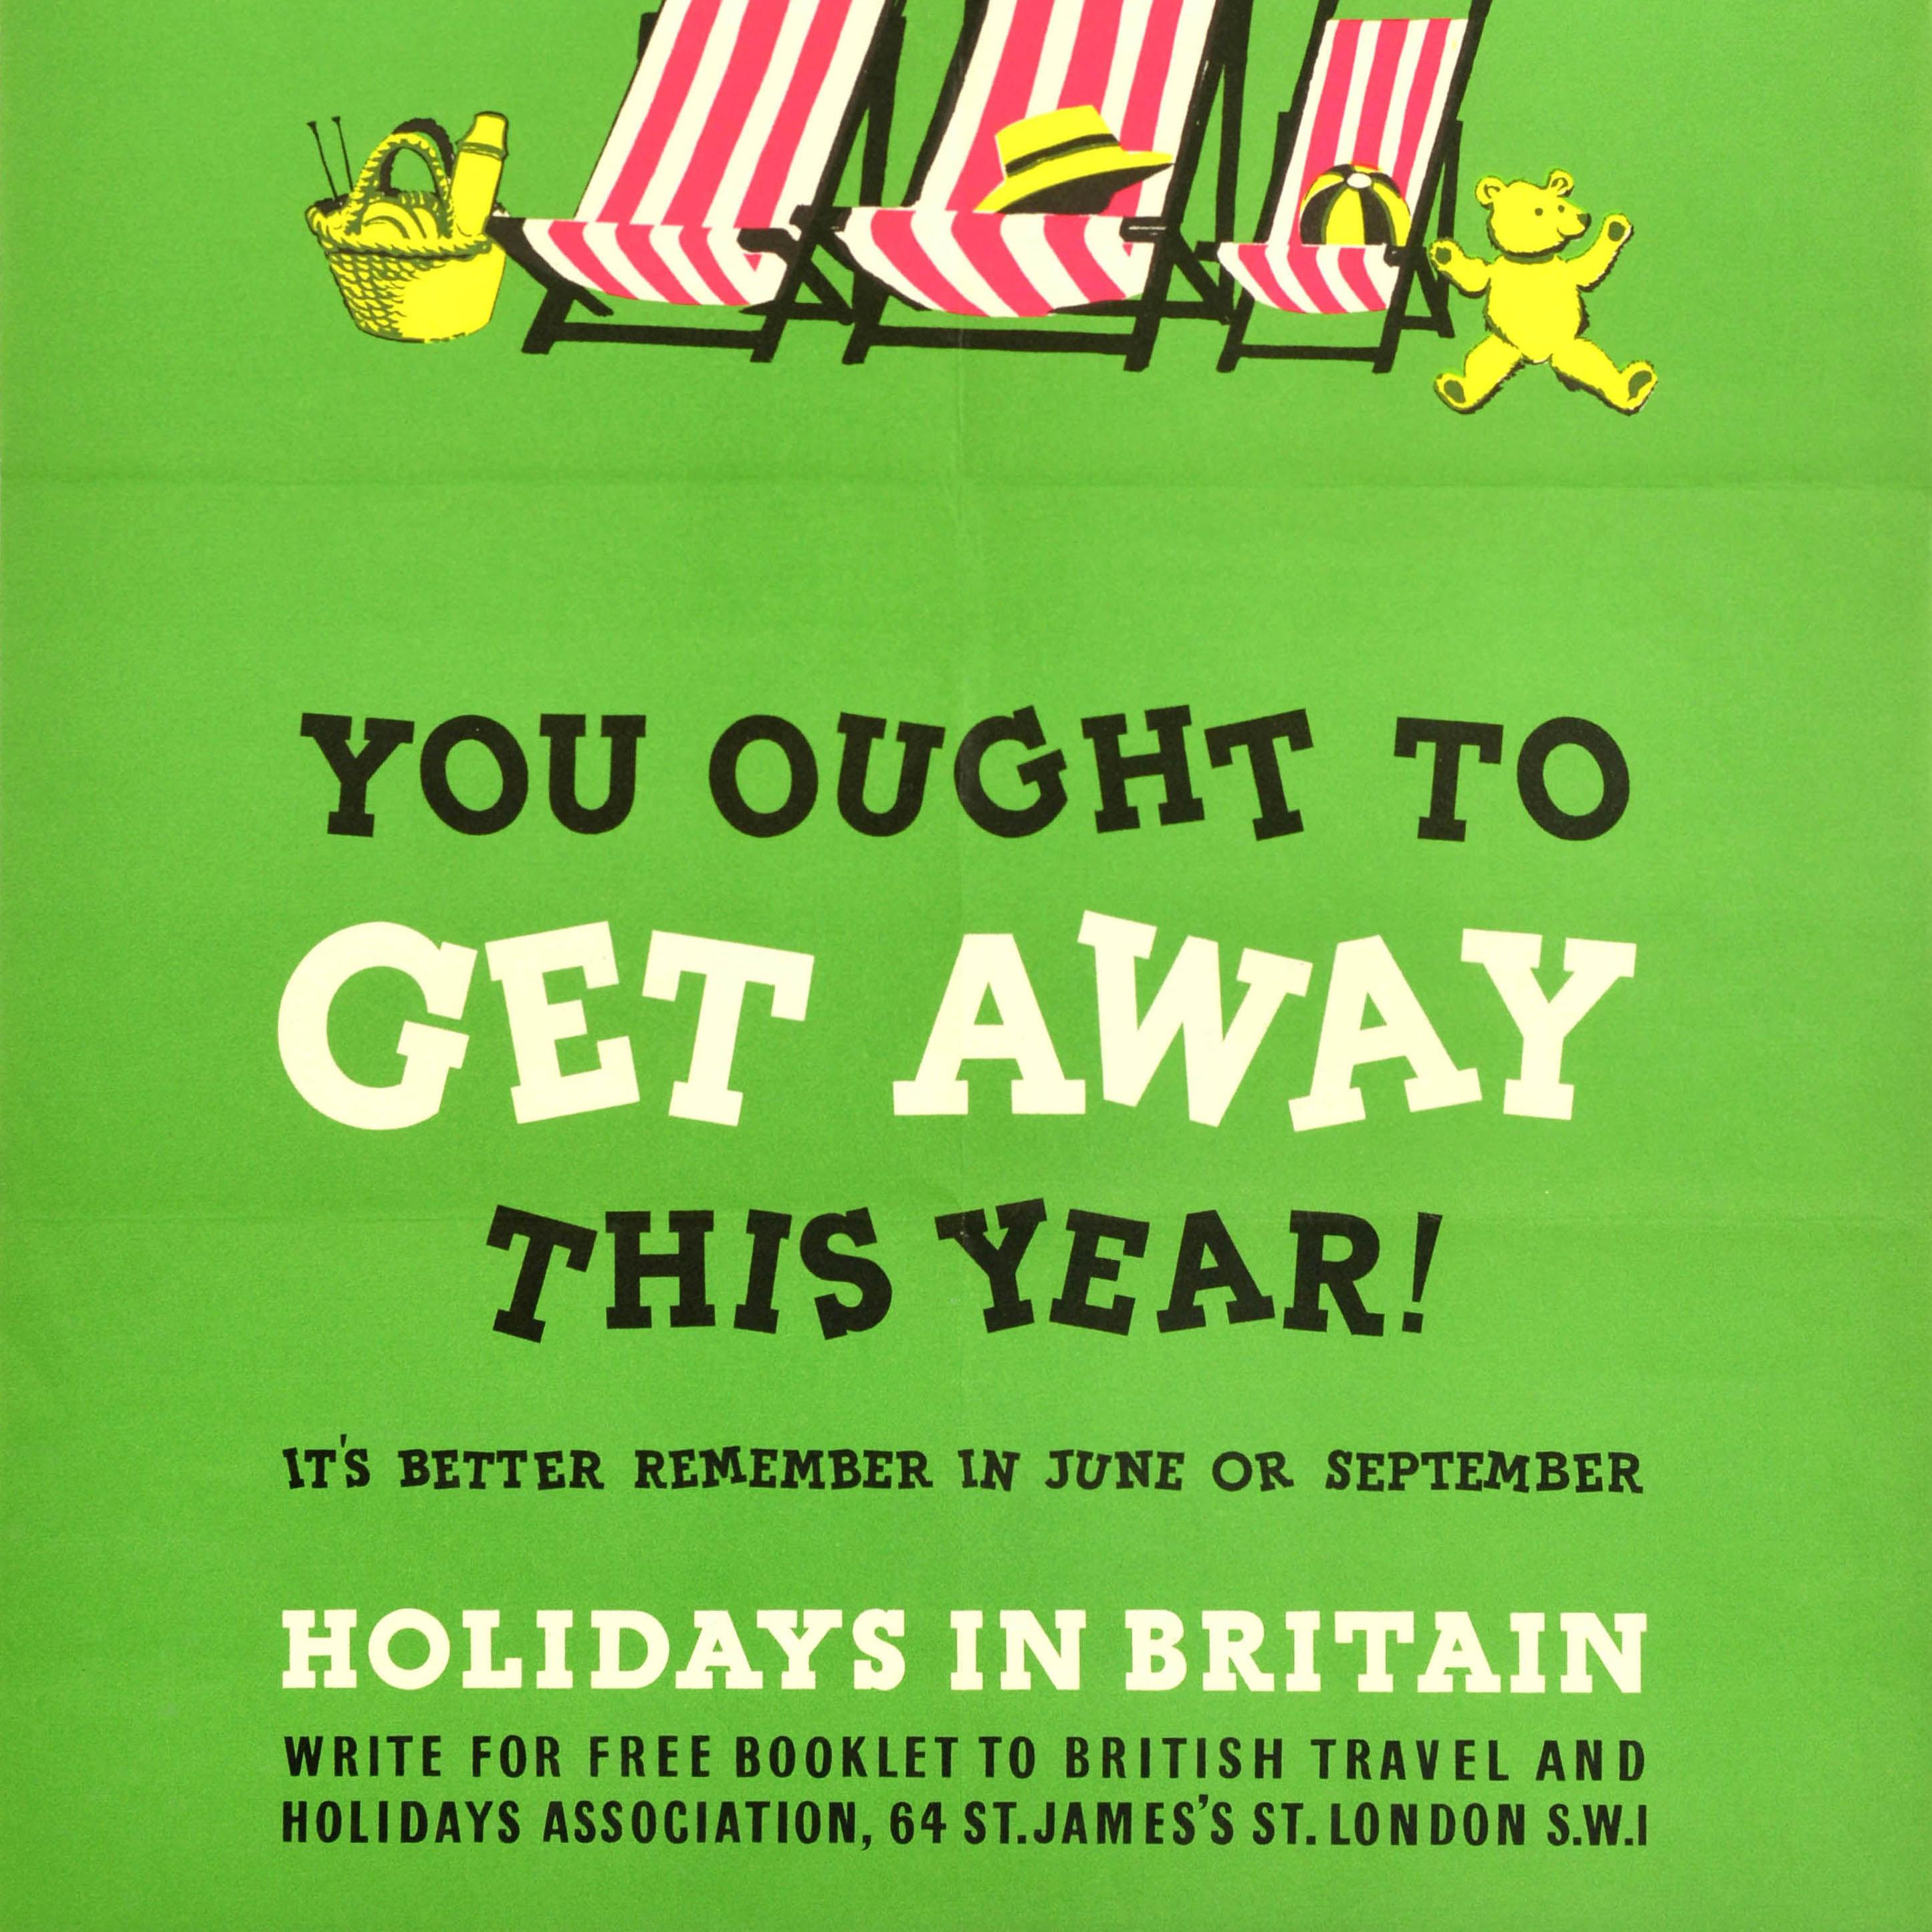 Original vintage travel poster promoting Holidays in Britain You ought to get away this year! It's better remember in June or September featuring a fun illustration of red and white striped deck chairs on a beach with a picnic basket, teddy bear,